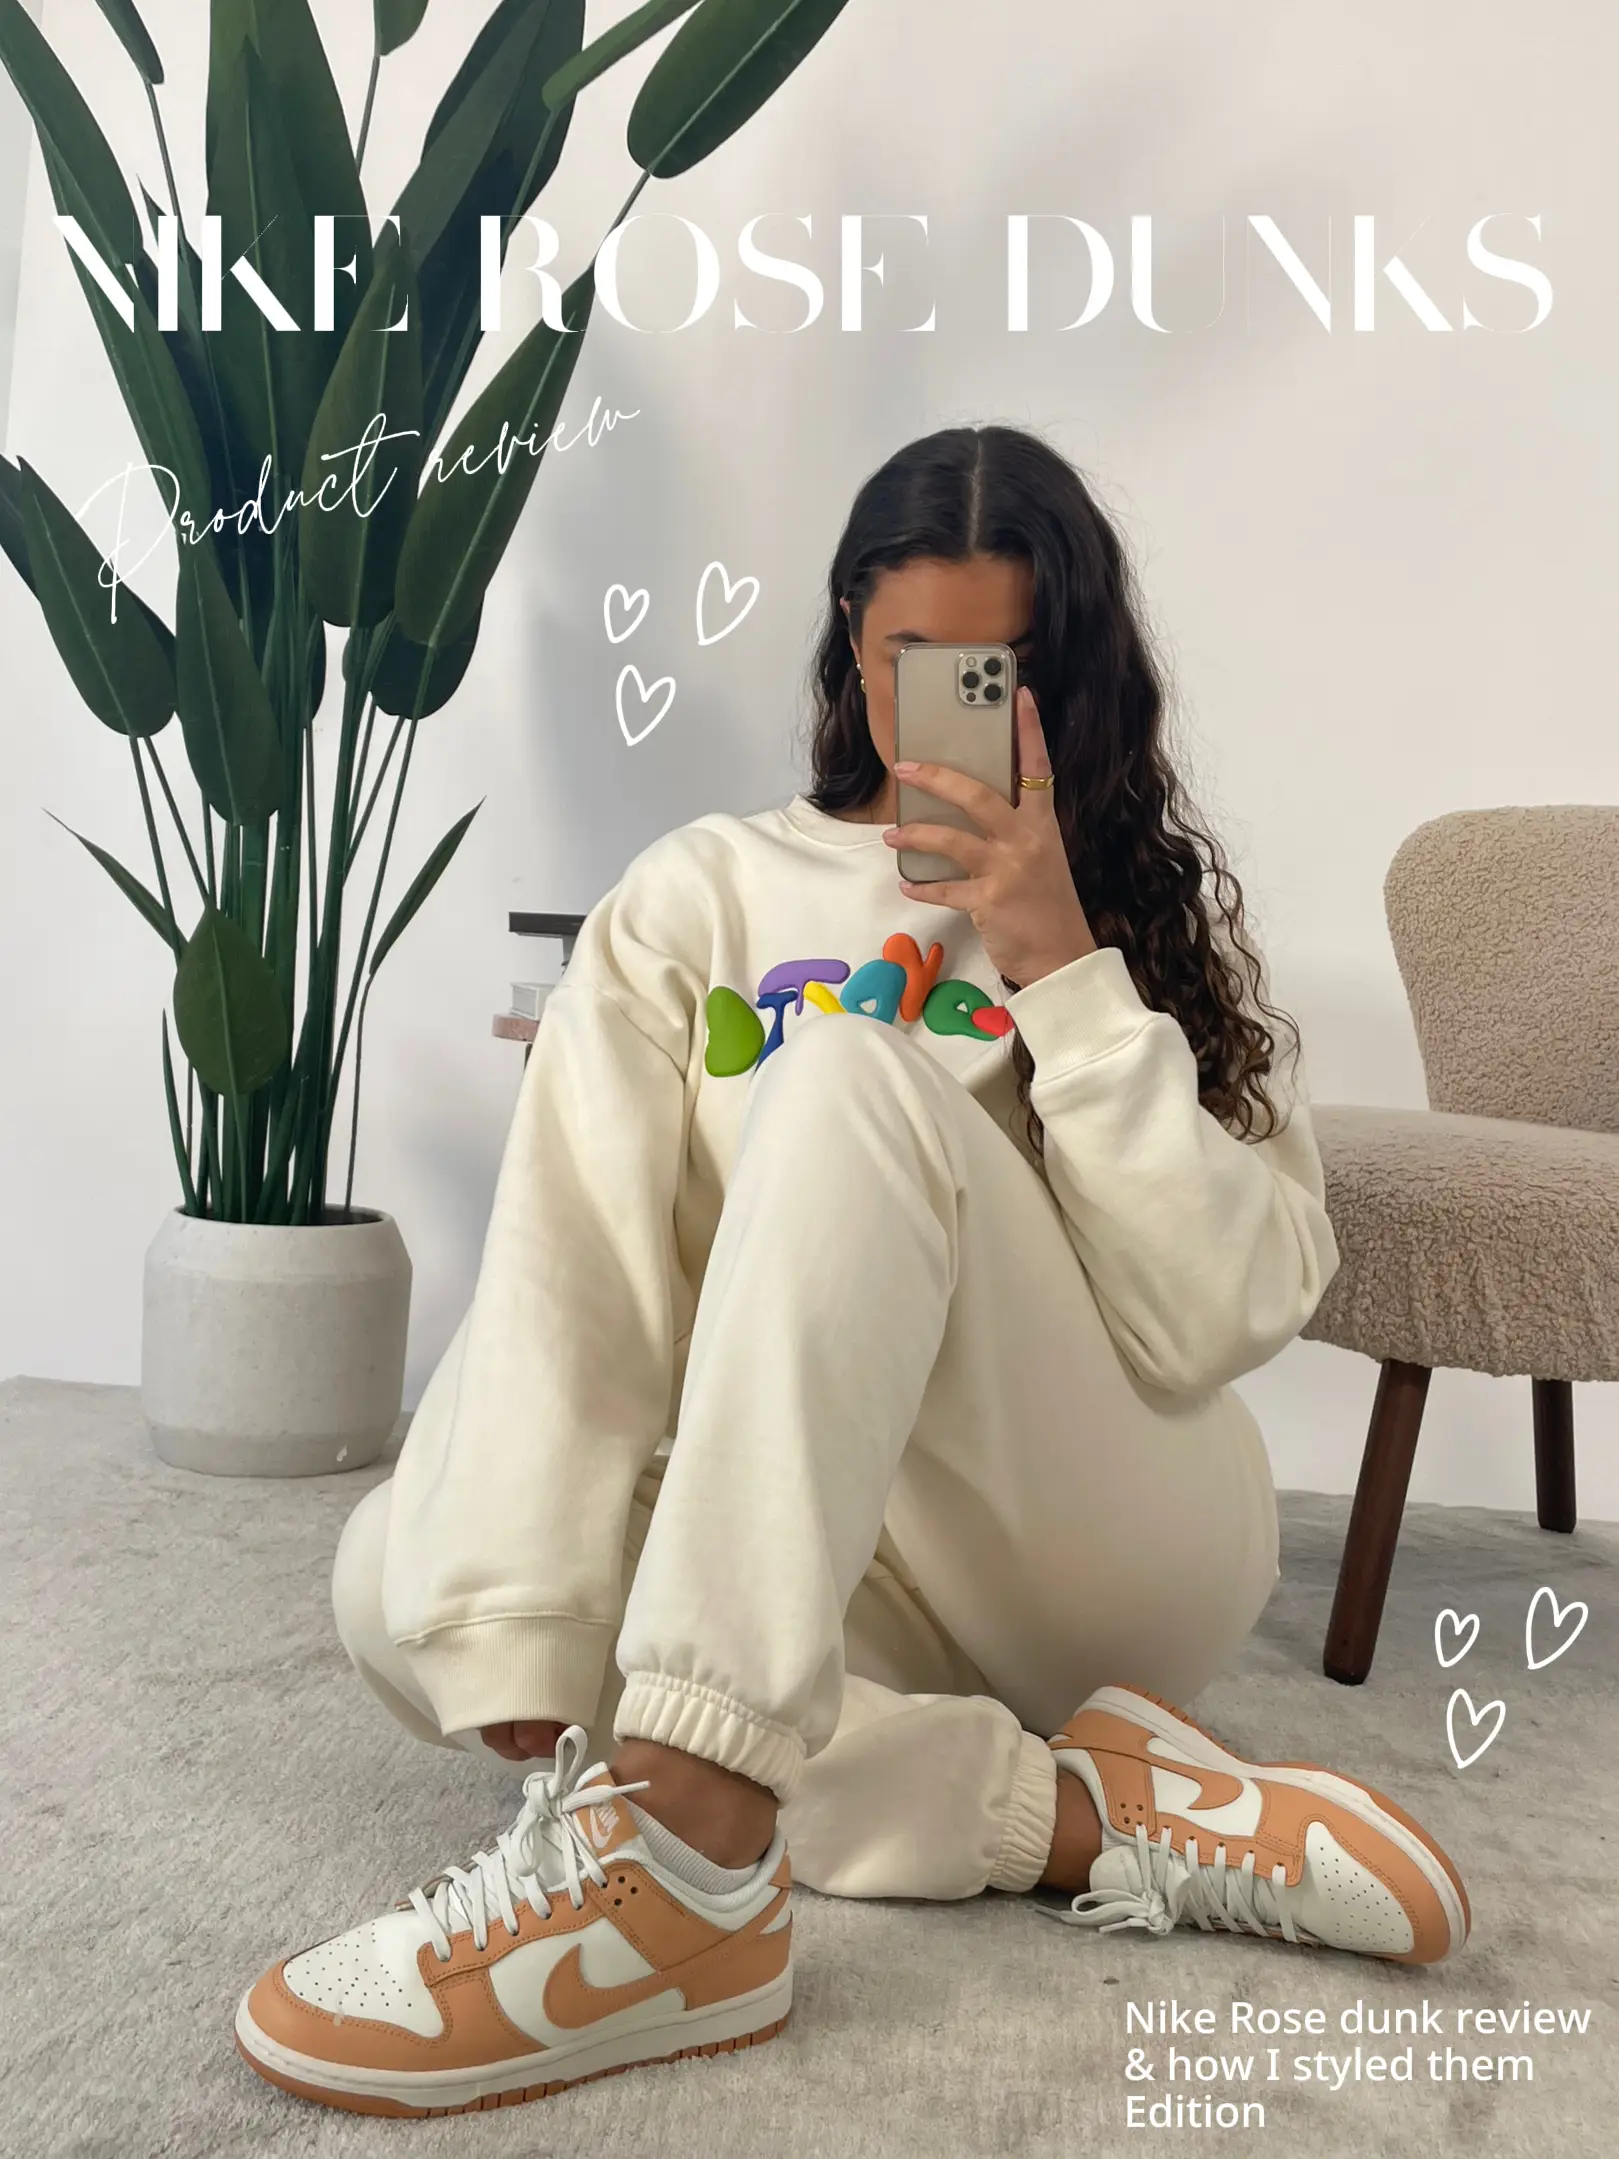 Vast Grey Dunks Outfit Inspo  Dunks outfit, Outfit inspo, Outfits